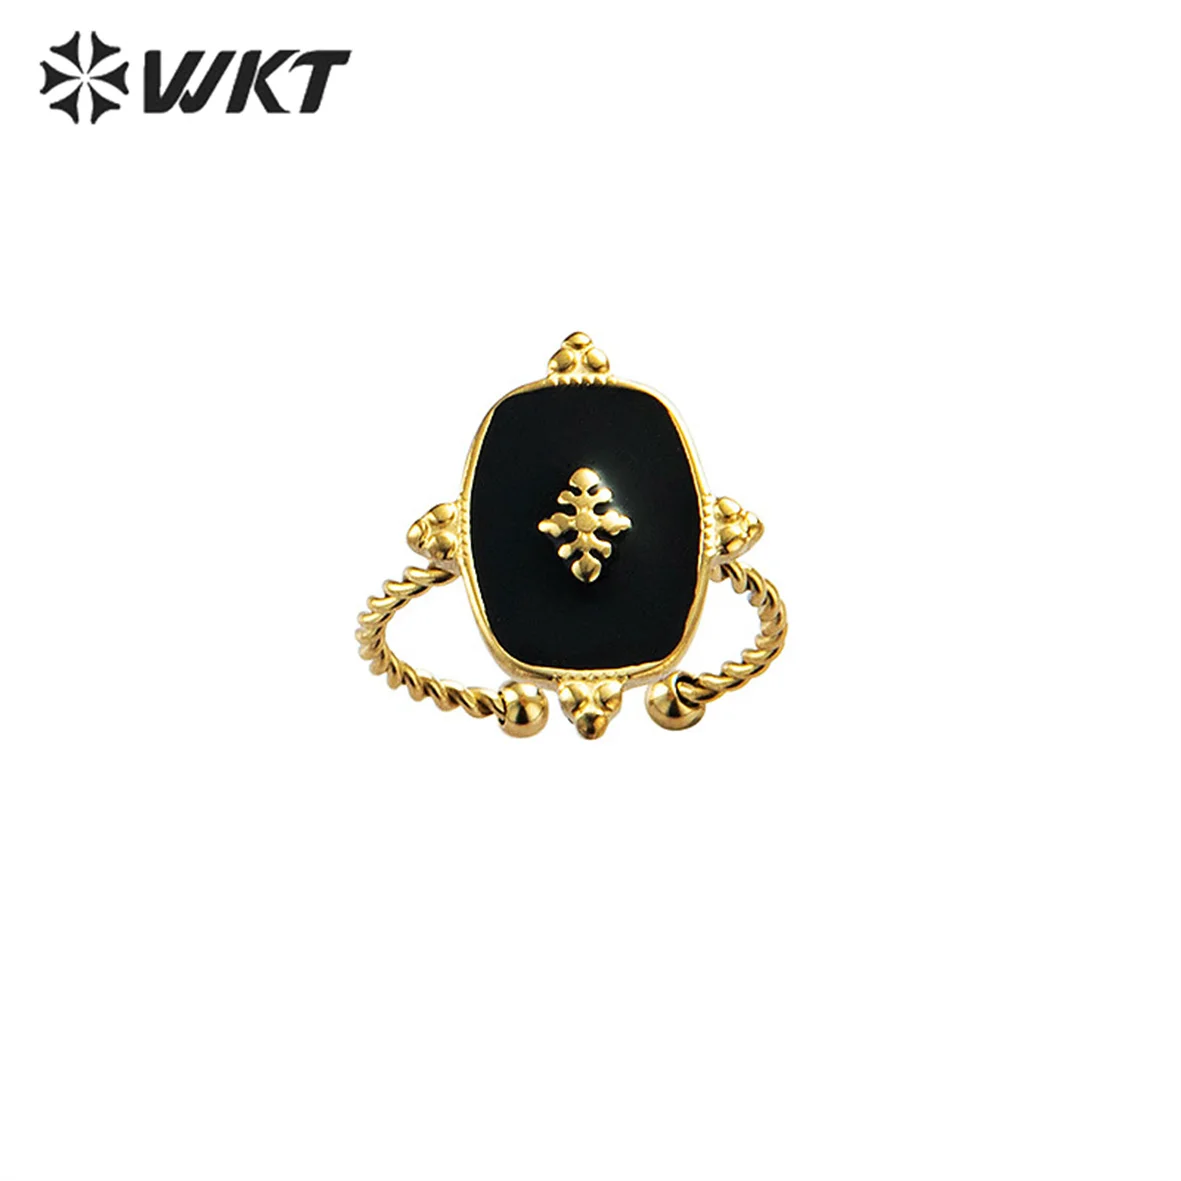 

WT-R396 WKT New Vintage Simple Black Enamel Geometric Stainless Steel Gold Plated Opening Ring Female Accessories Wholesale